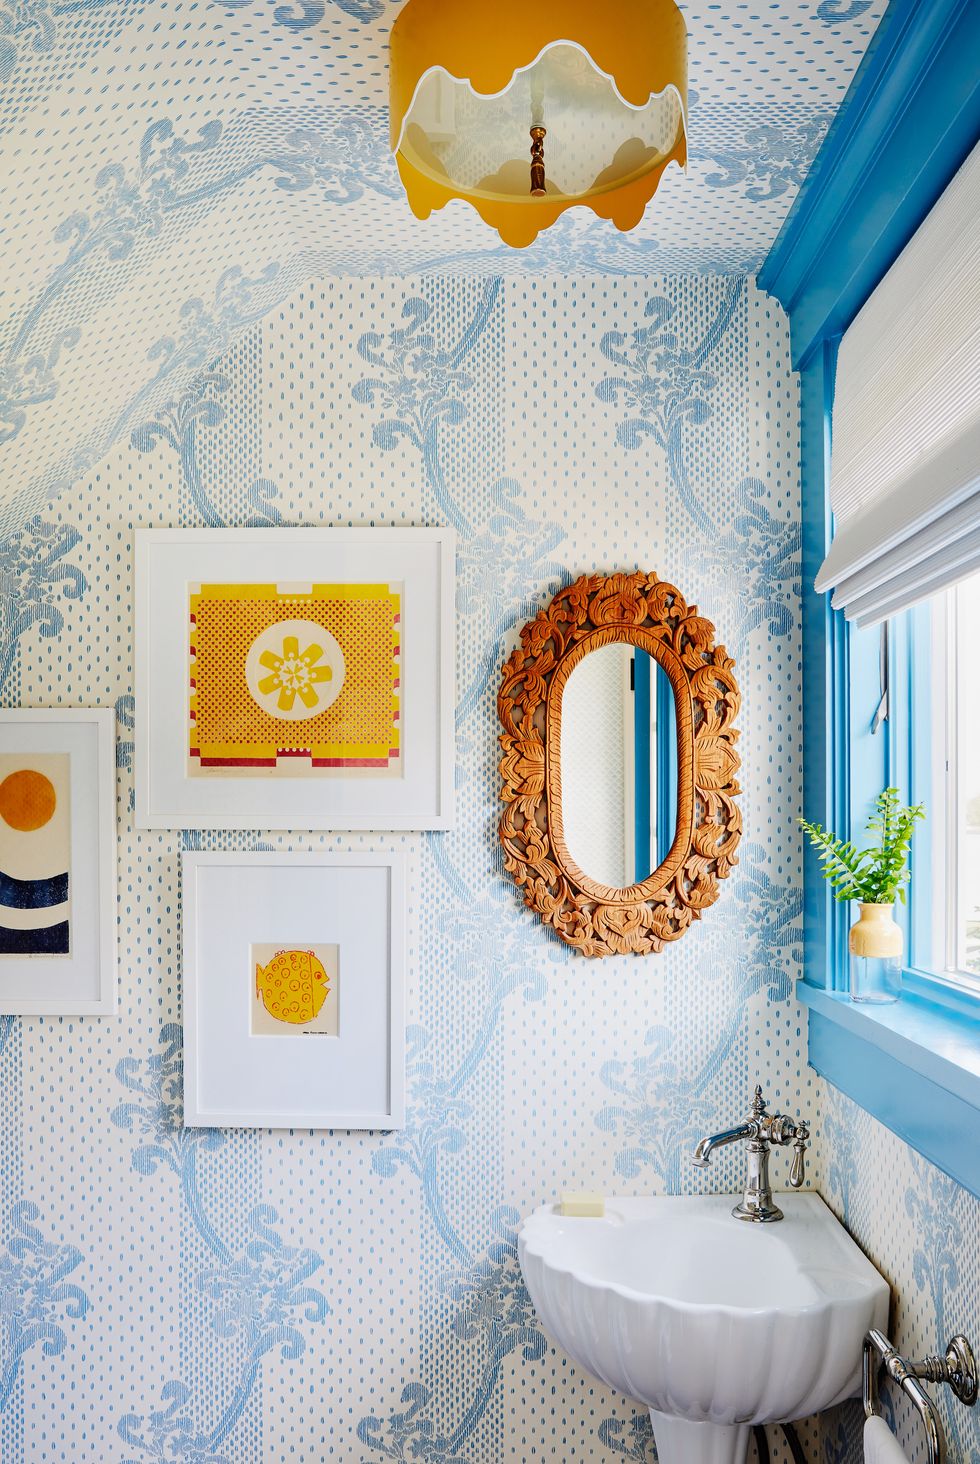 13 Bathroom Decor Things To Consider Adding - Frame It Easy